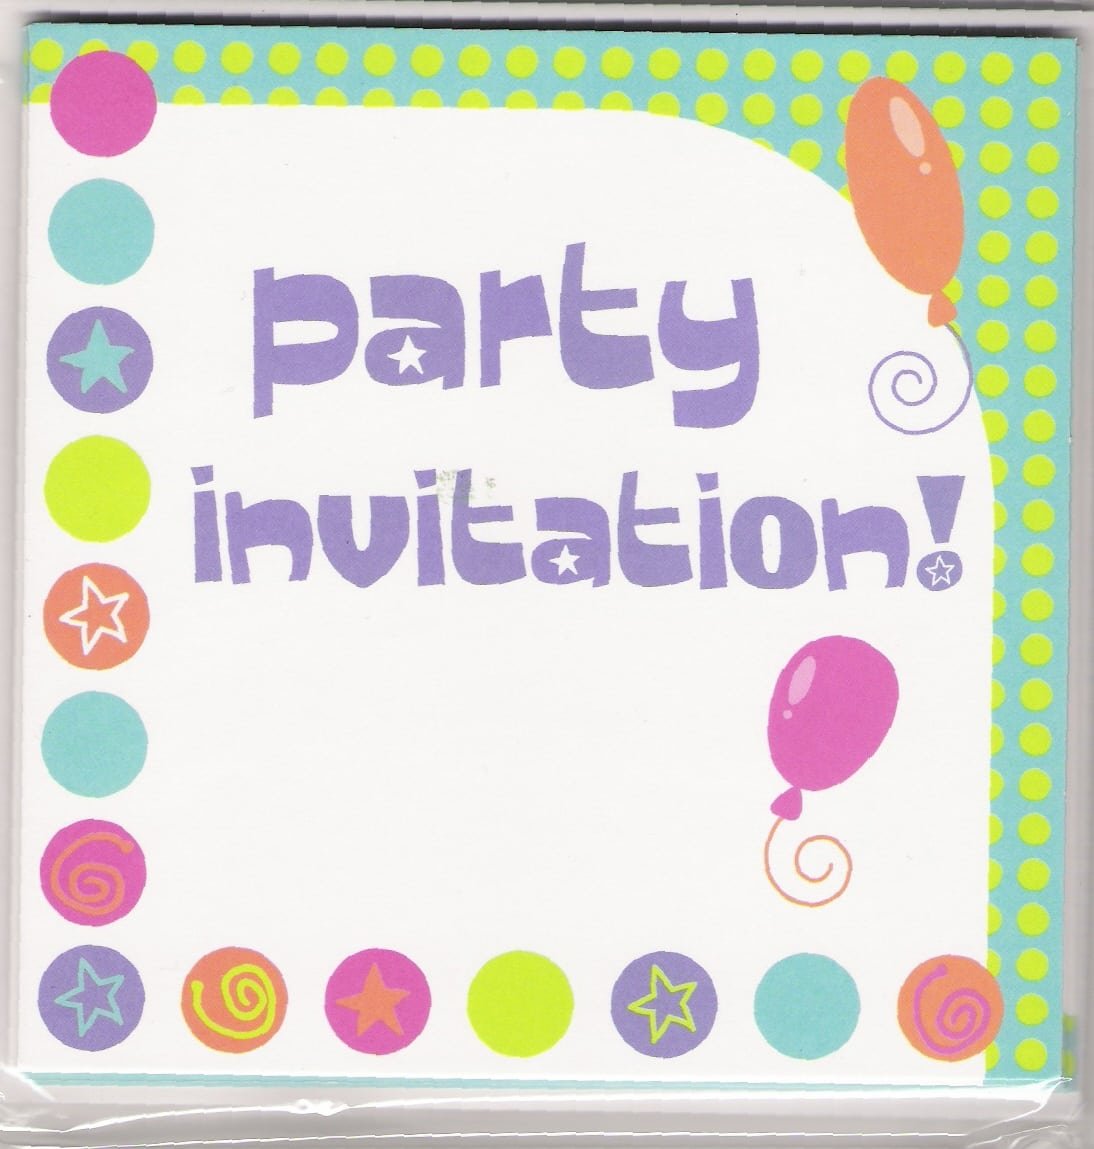 Invitation Card For Party